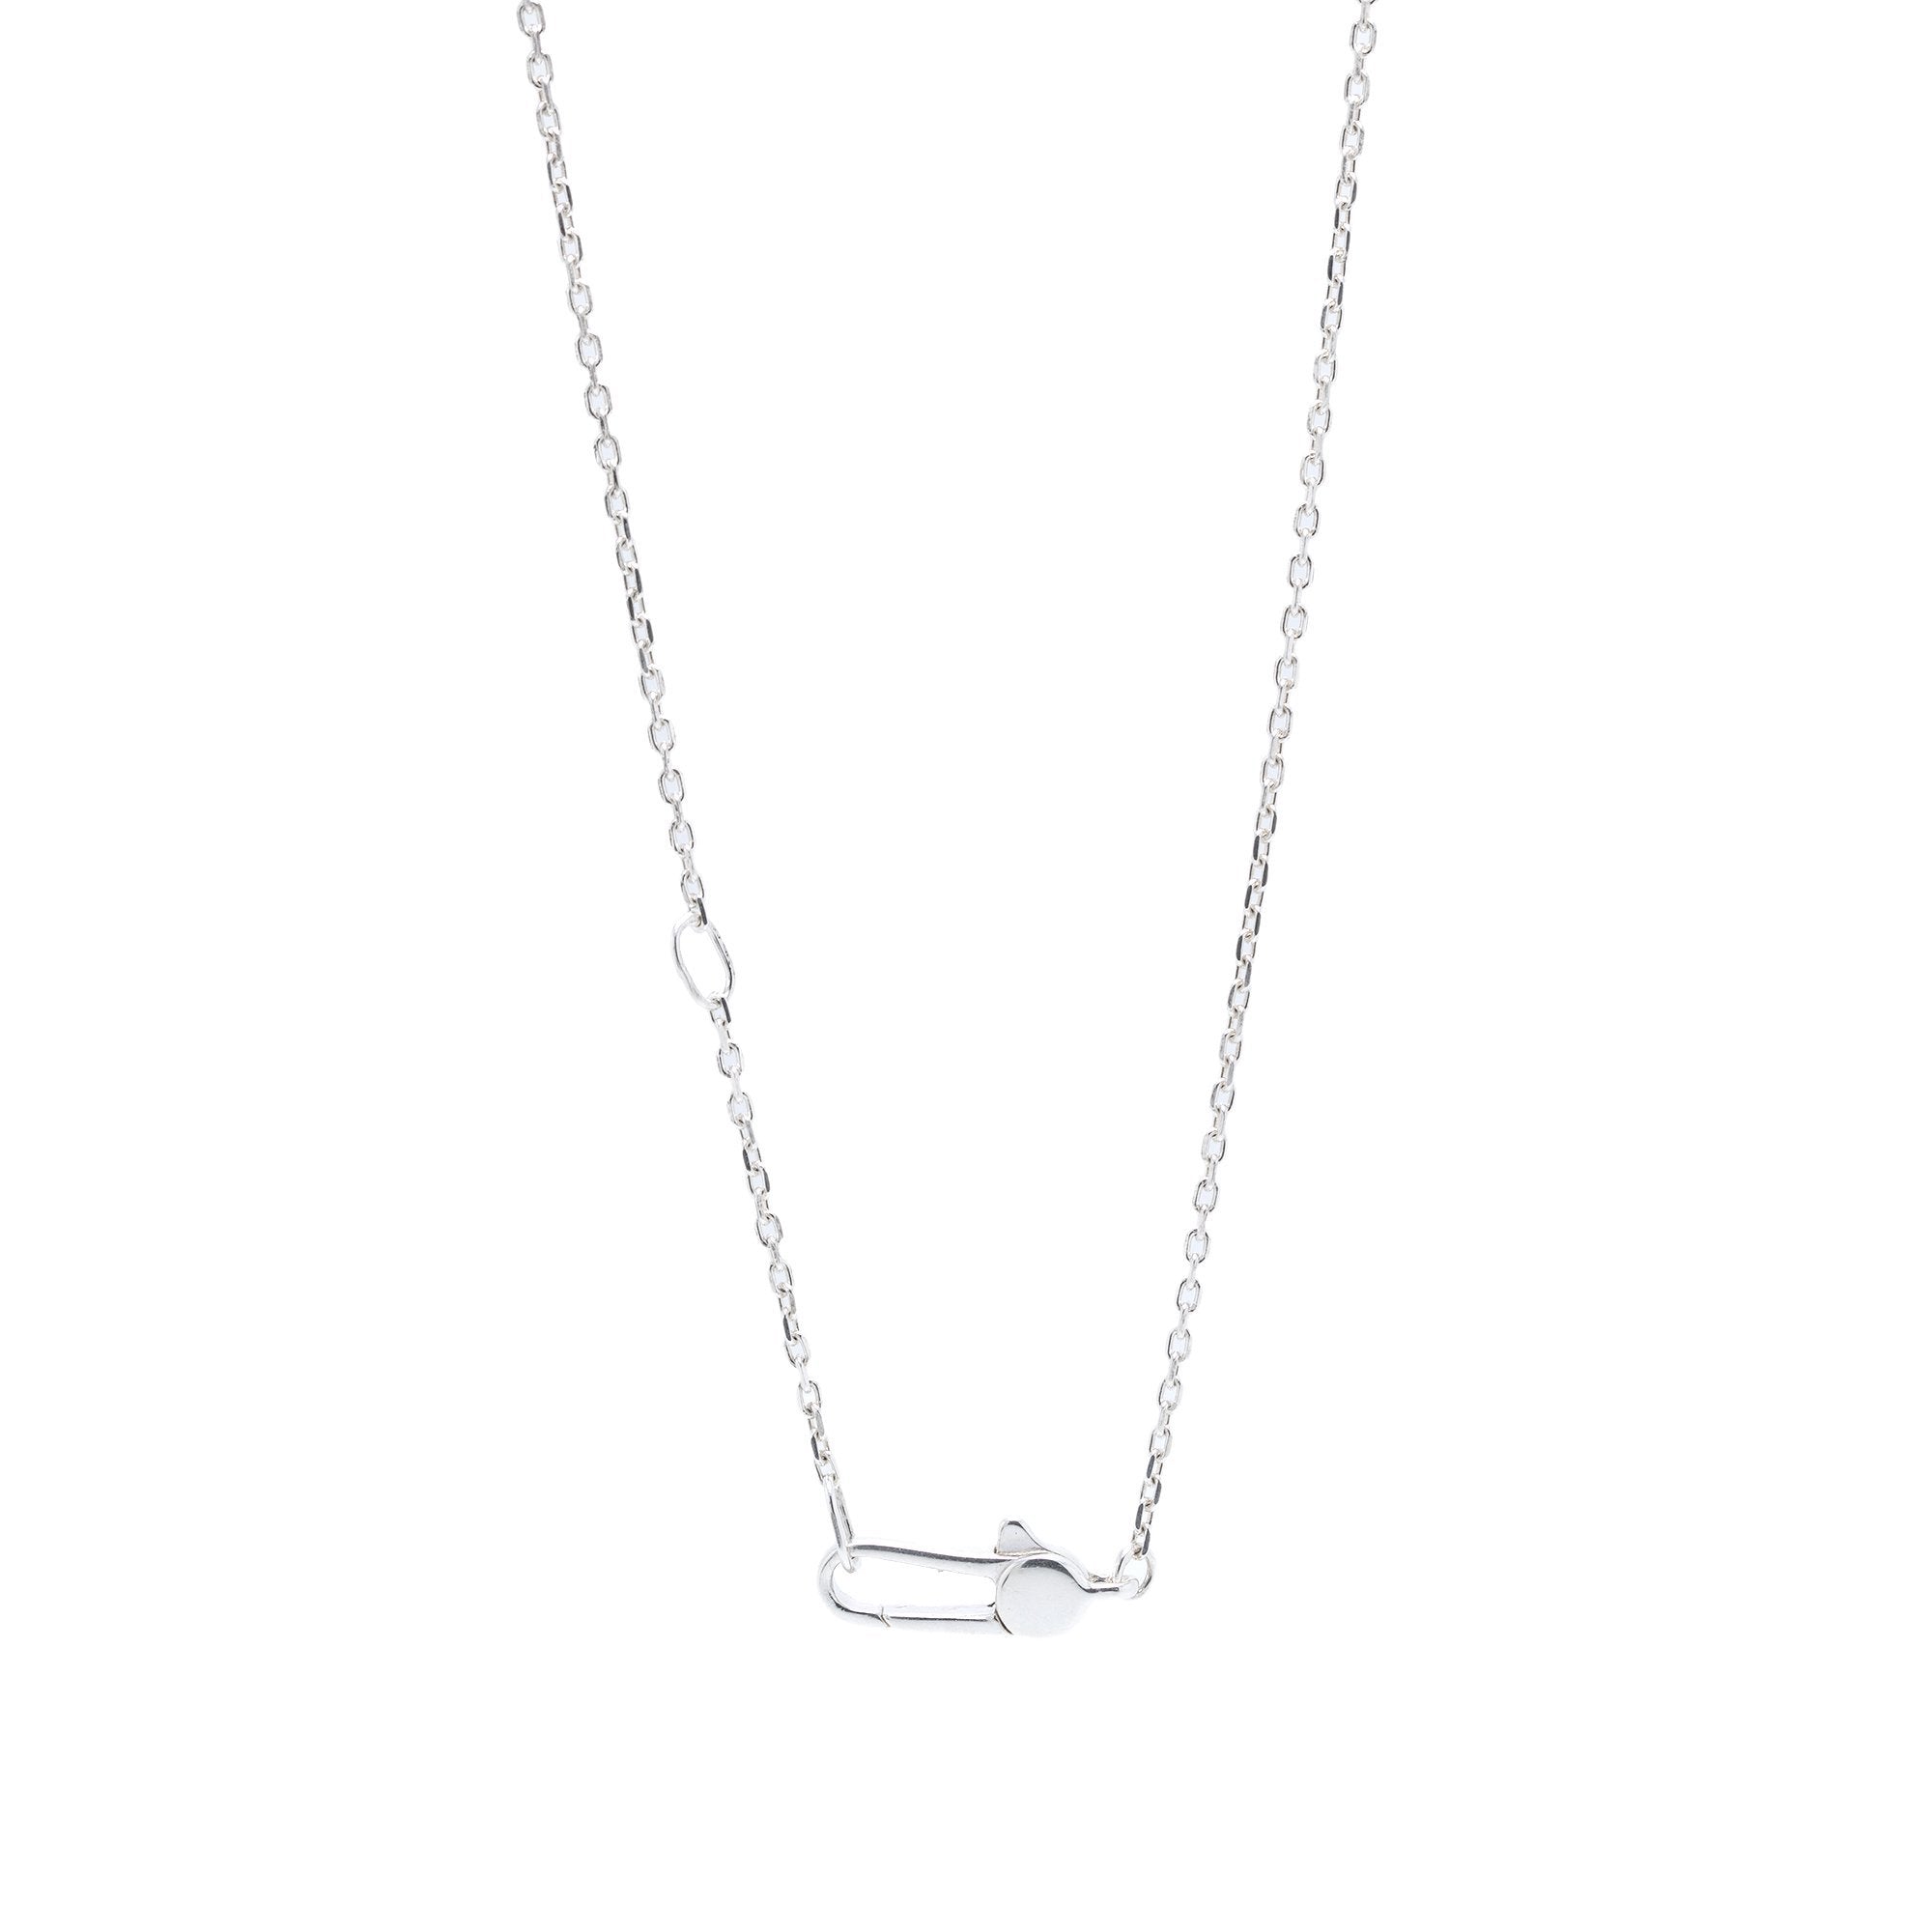 Trademark necklace with heart pendant